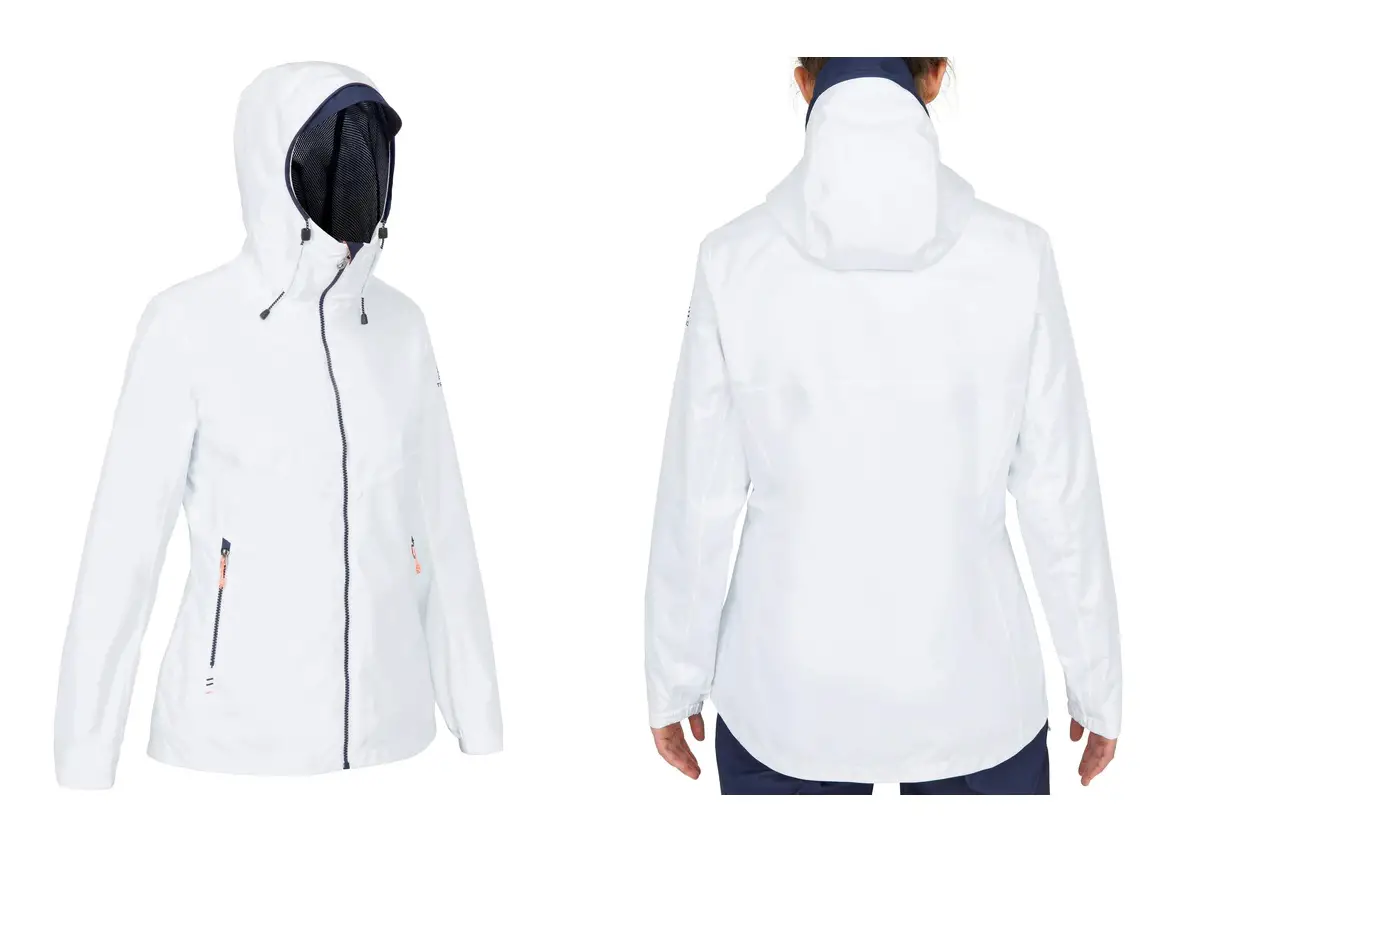 The Duchess of Cambridge wore Tribord Sailing Jacket